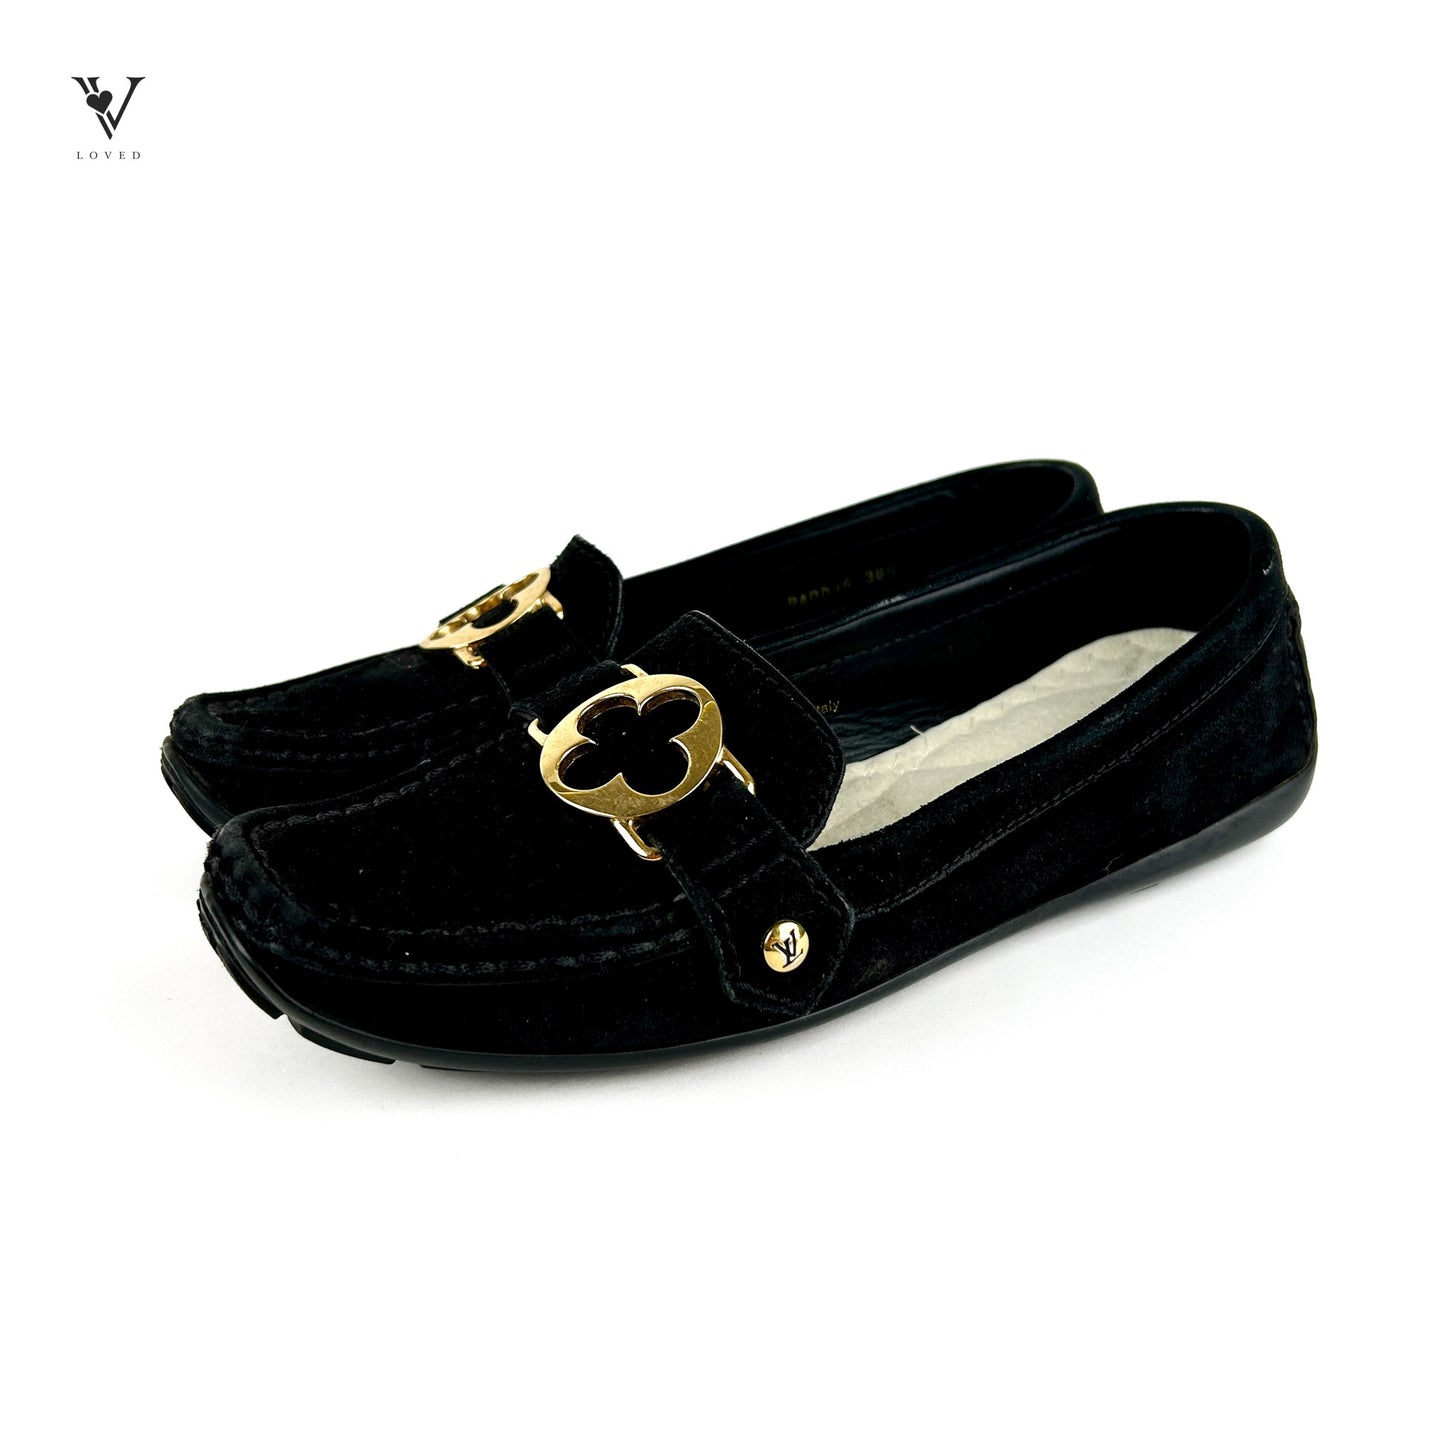 Black Suede Oxford Loafers